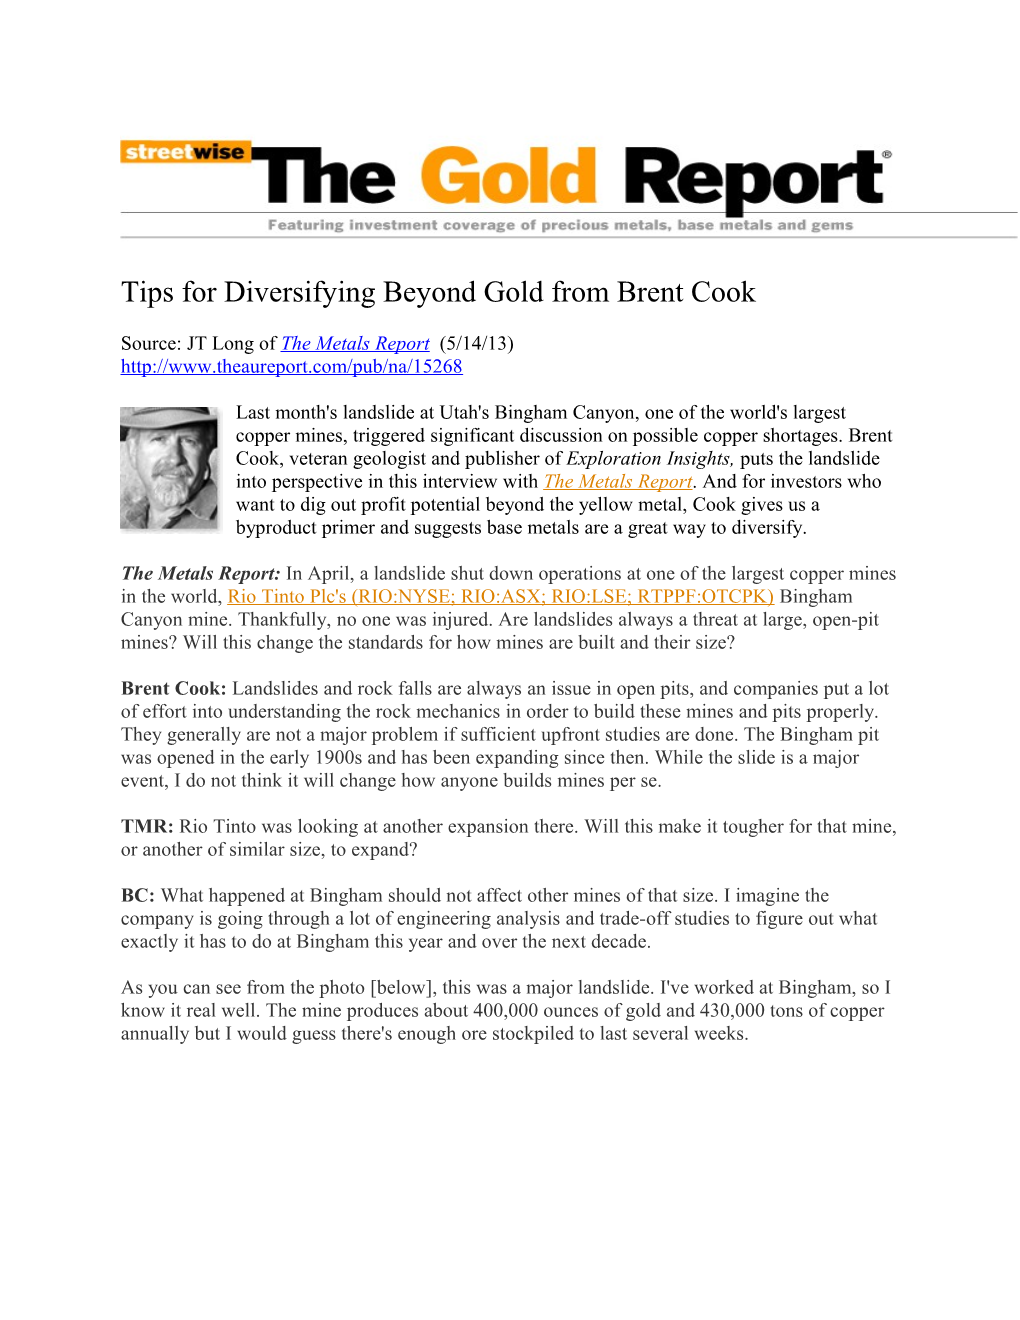 Tips for Diversifying Beyond Gold from Brent Cook